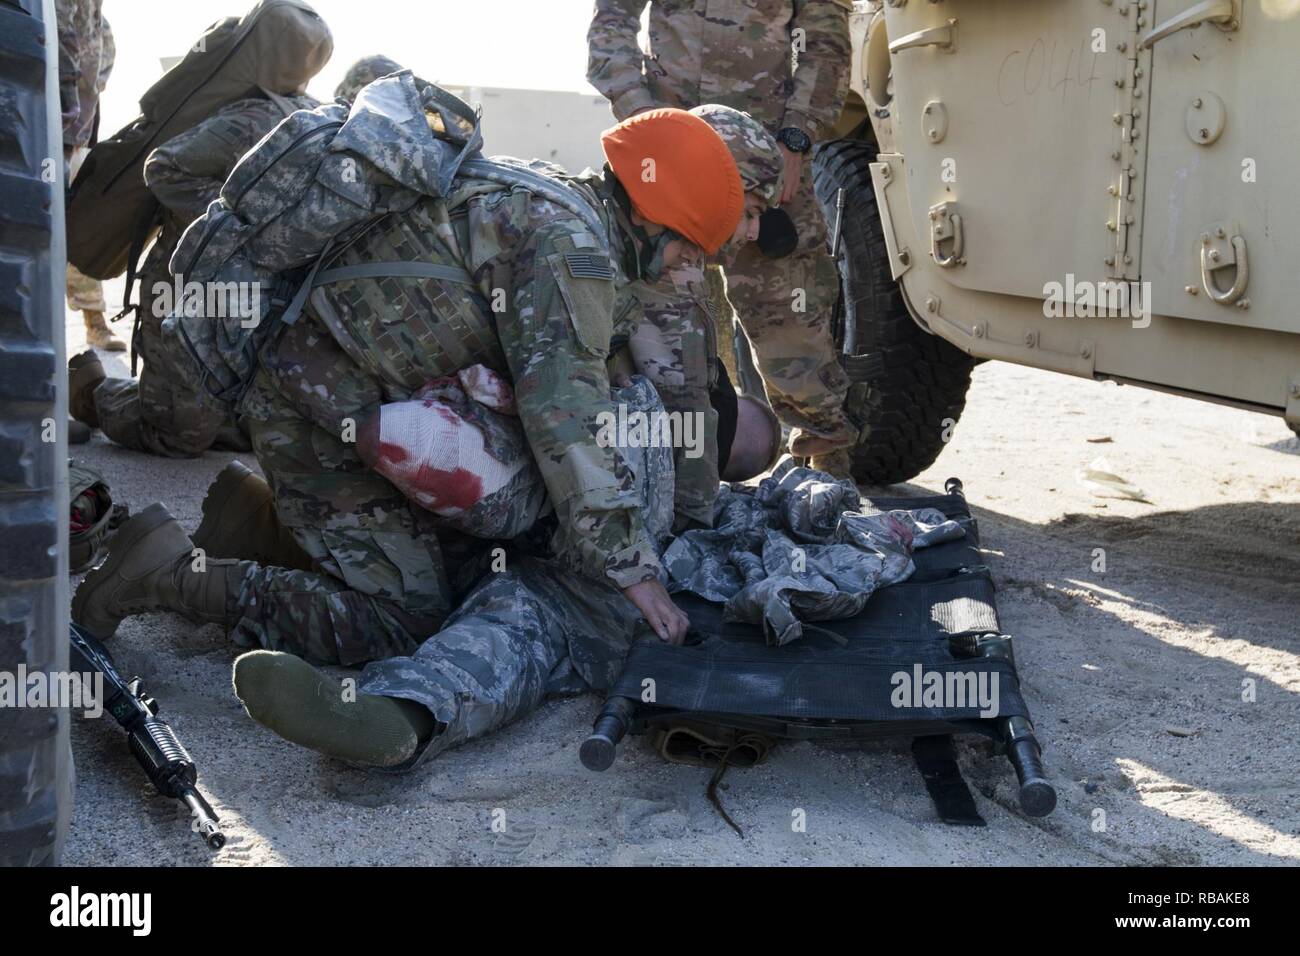 U.S. Army combat medics prepare to roll a simulated casualty onto a litter during a medical training scenario, Dec. 23, 2018, Camp Arifjan, Kuwait. The medics were being tested on various tasks to meet their ongoing training requirements as combat medics. Stock Photo